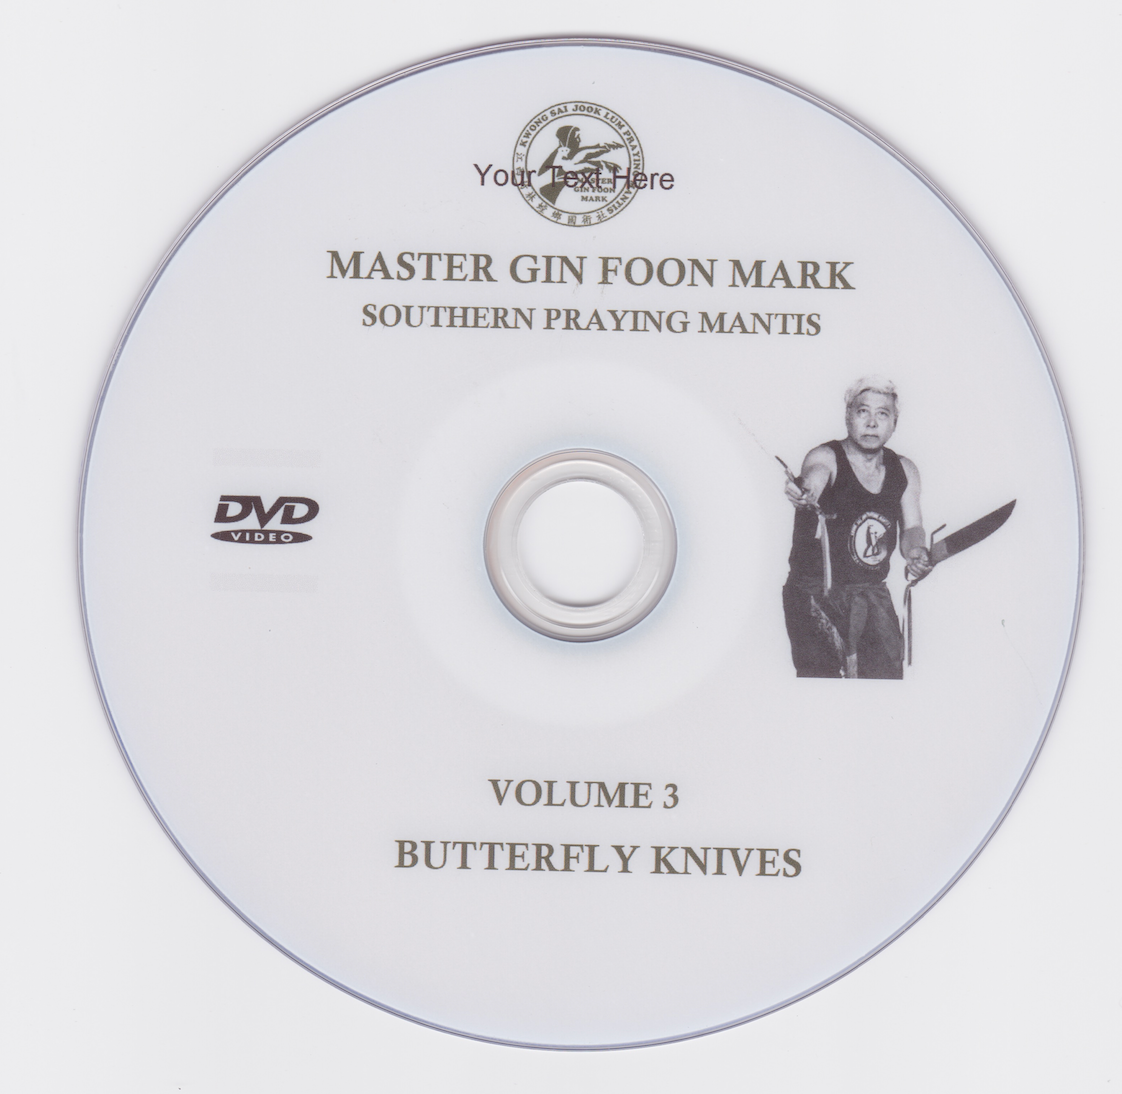 Southern Praying Mantis Kung Fu Vol 3: Butterfly Knives DVD by Gin Foon Mark (Preowned) - Budovideos